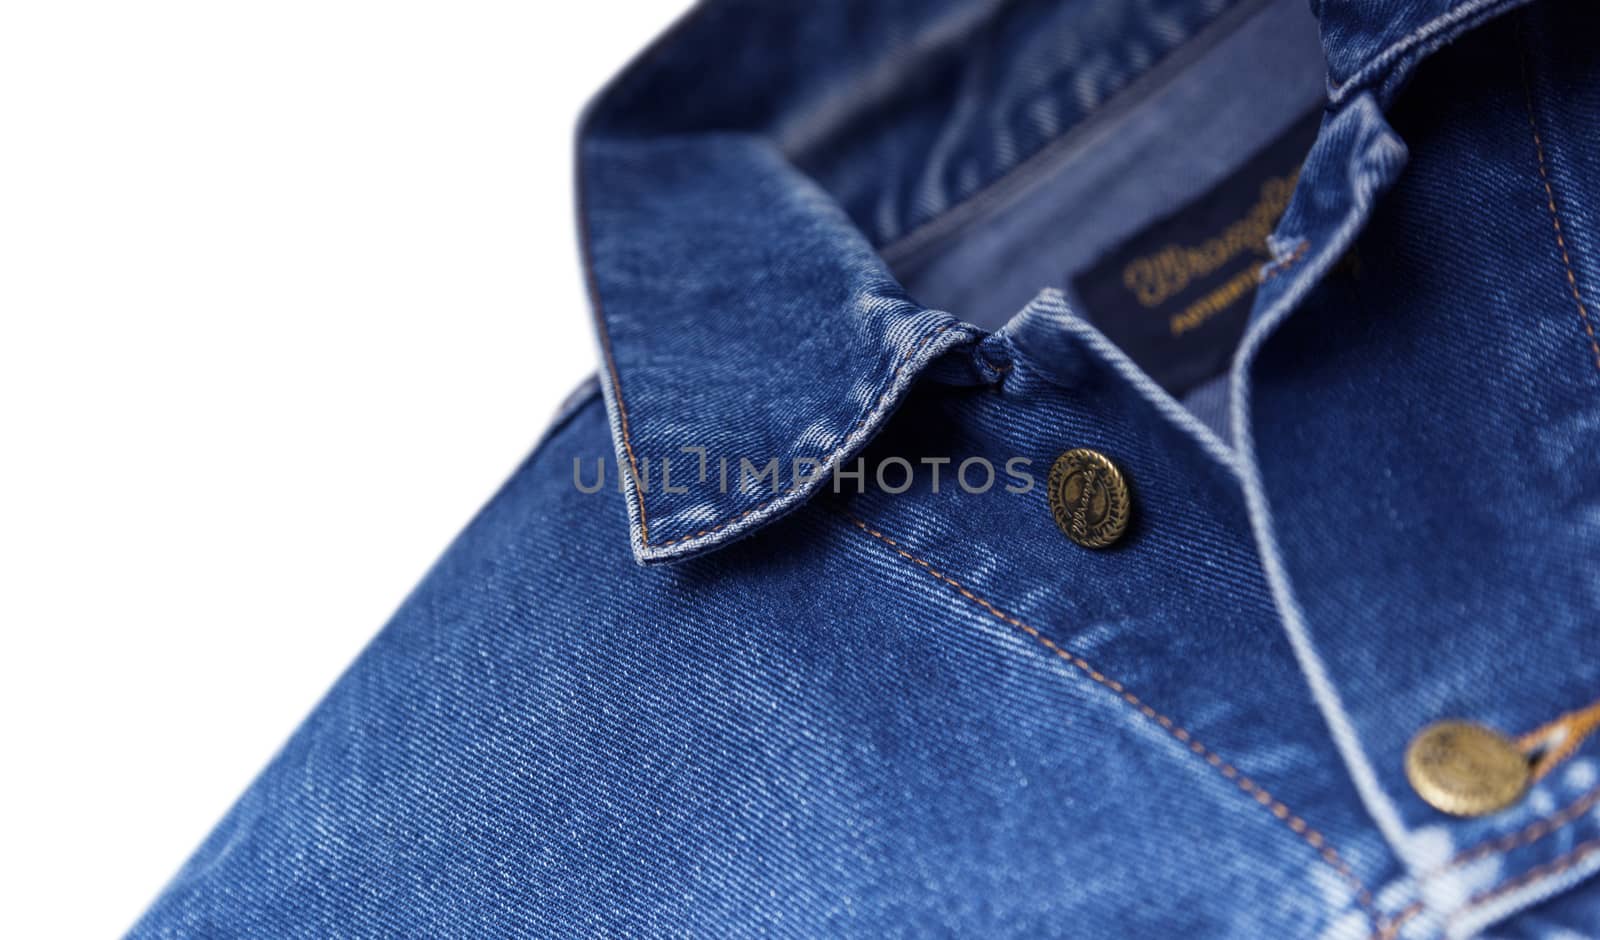 CHISINAU, MOLDOVA - December 25, 2017: Jeans jacket Wrangler blue color, isolated on white background. The Wrangler brand is owned by VF Corporation of Greensboro, North Carolina USA. Top view, blurred concept